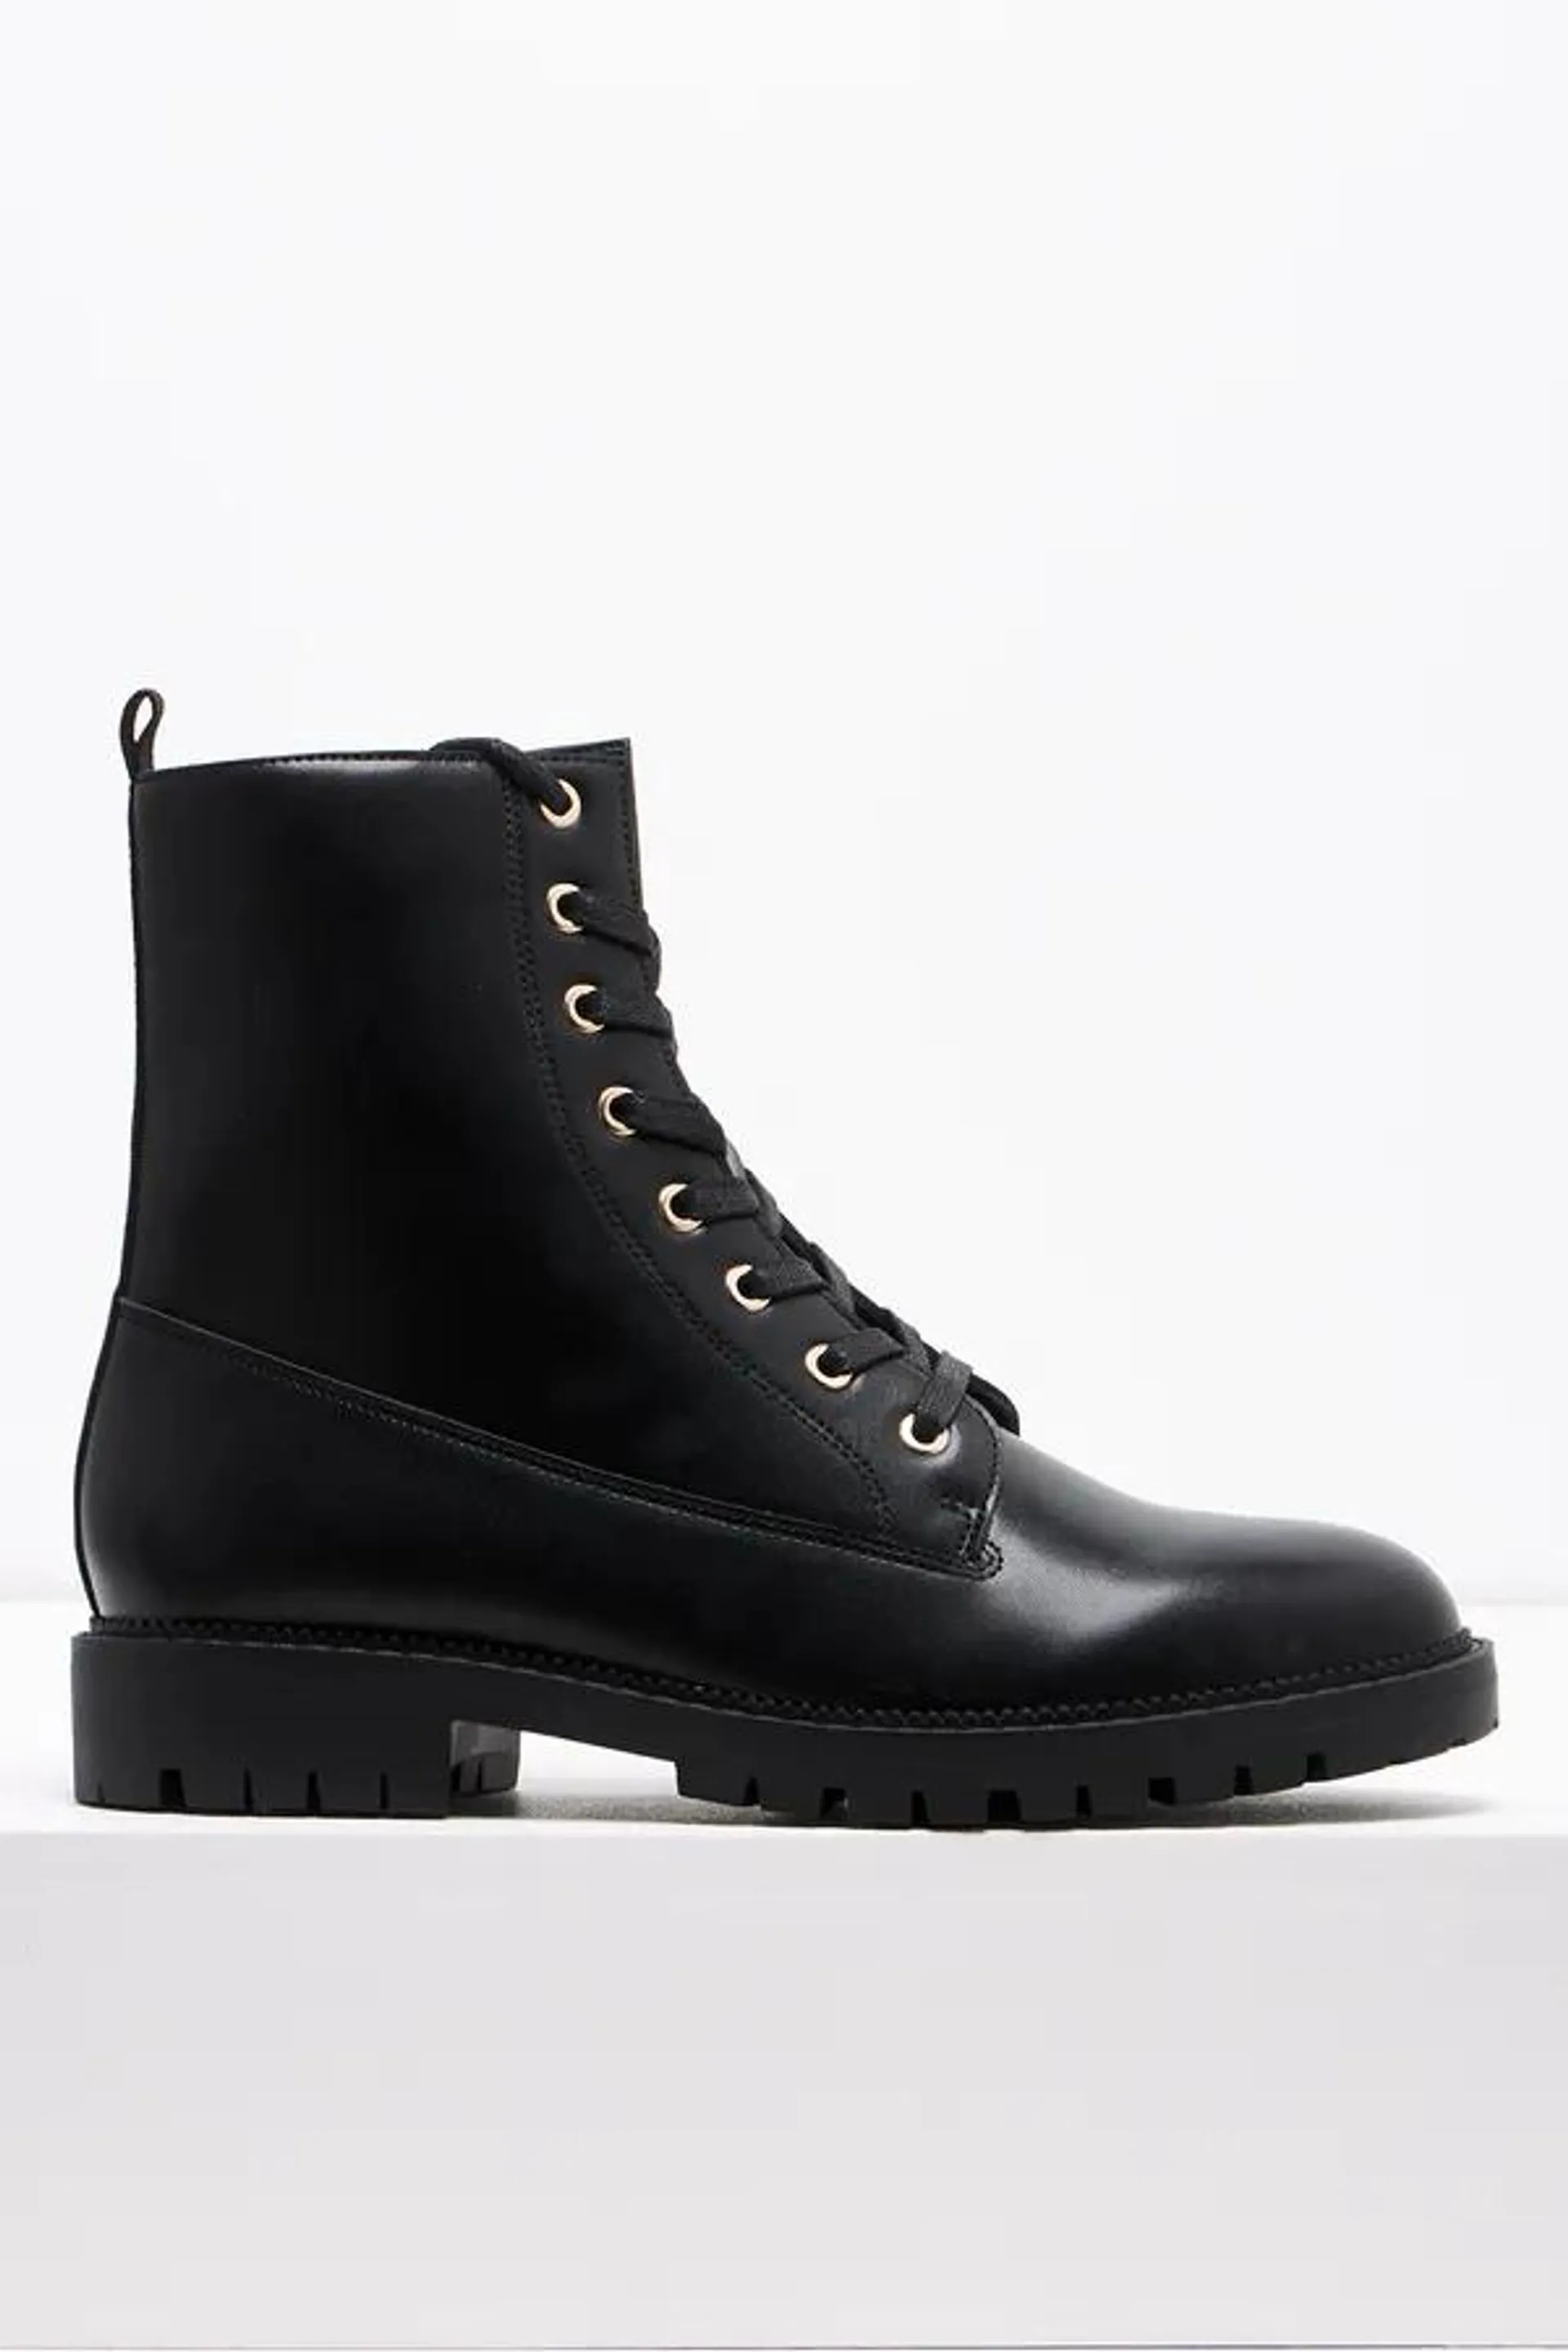 Lace up boot black